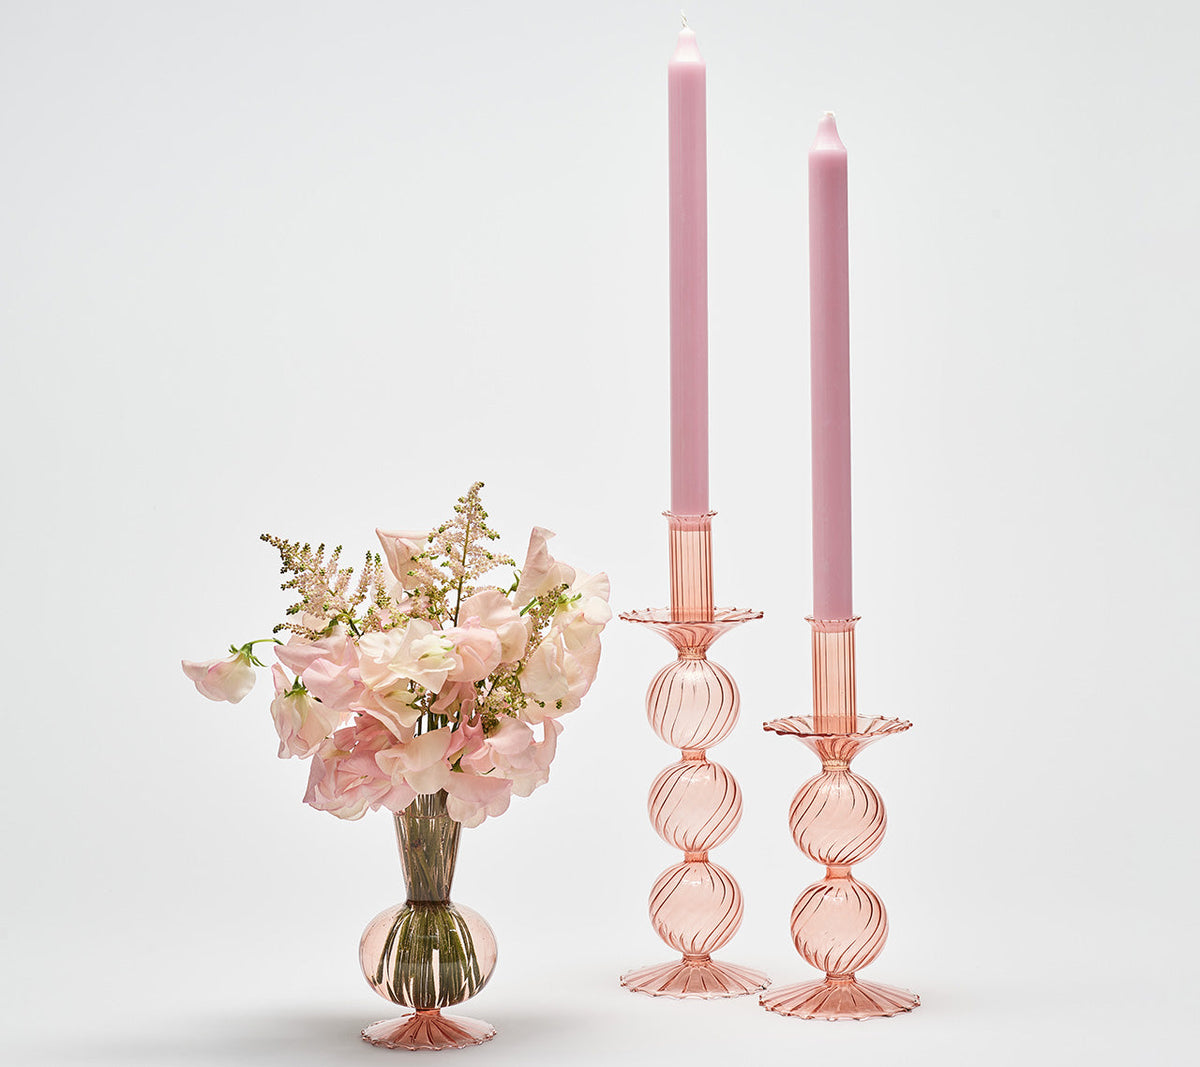 Two Iris Tall Candle Holders in blush next to a vase with blush flowers